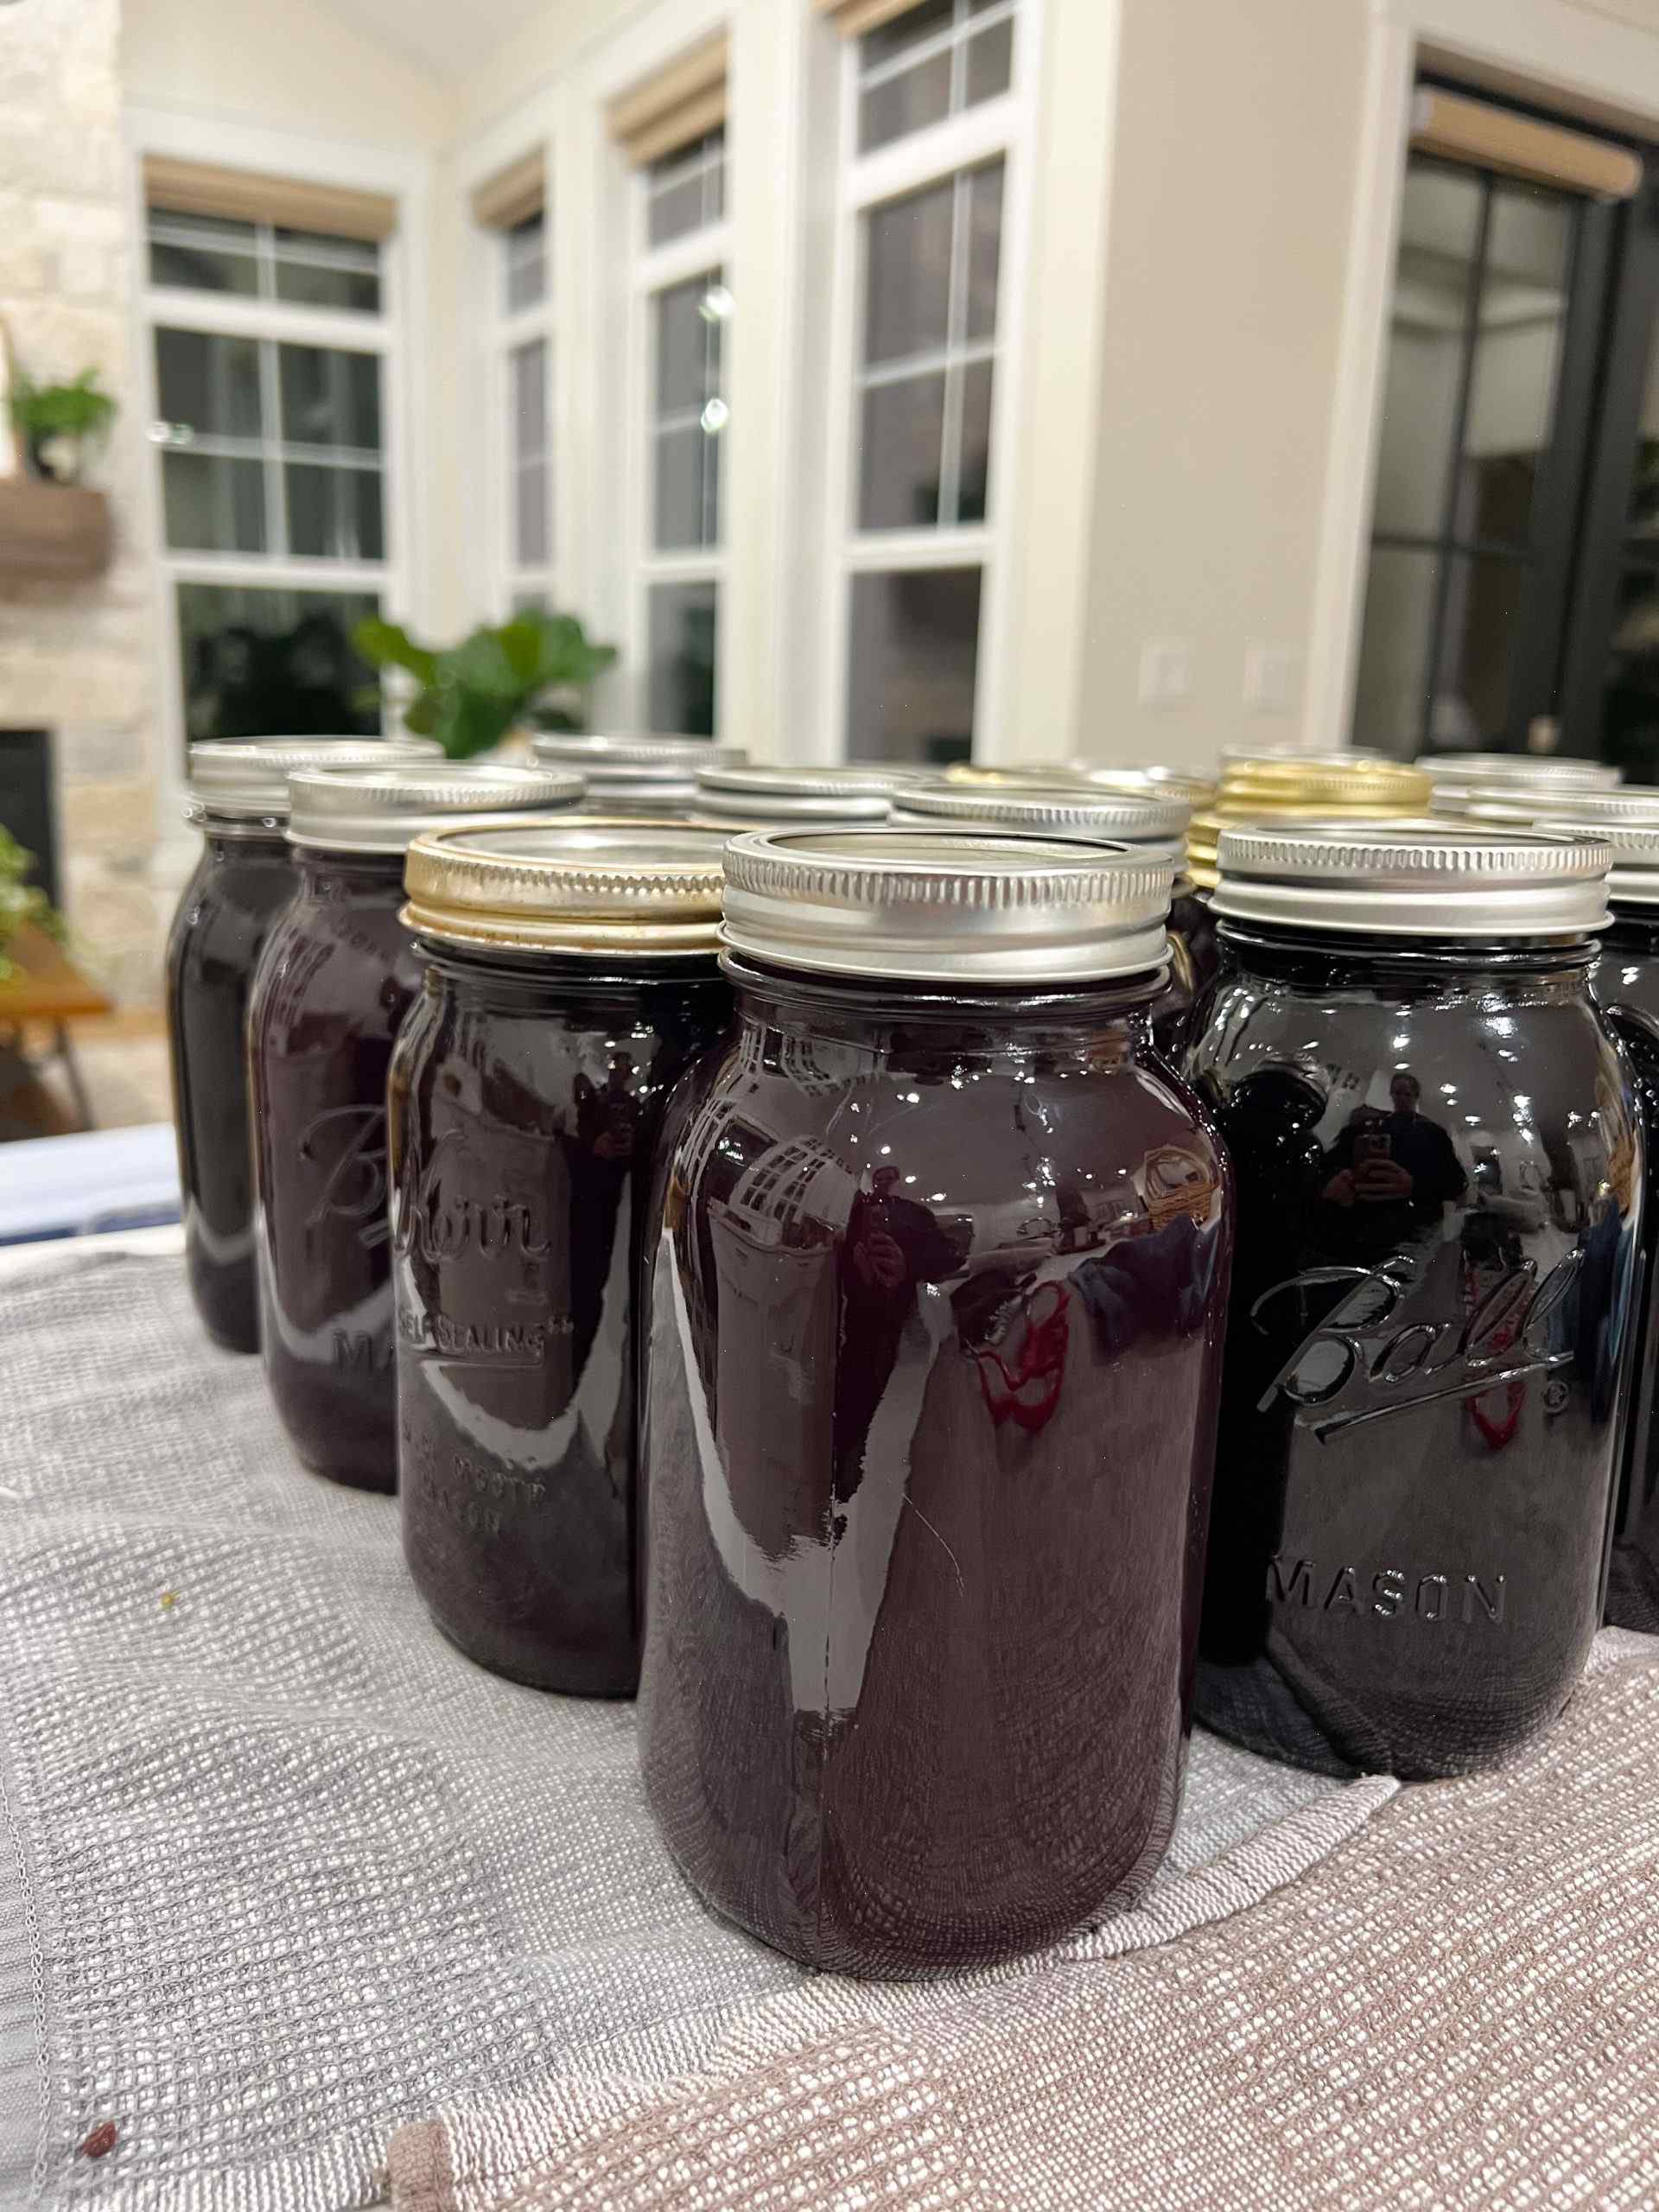 Squeezing More Than Just Grapes: The Benefits of Making Your Own Grape Juice